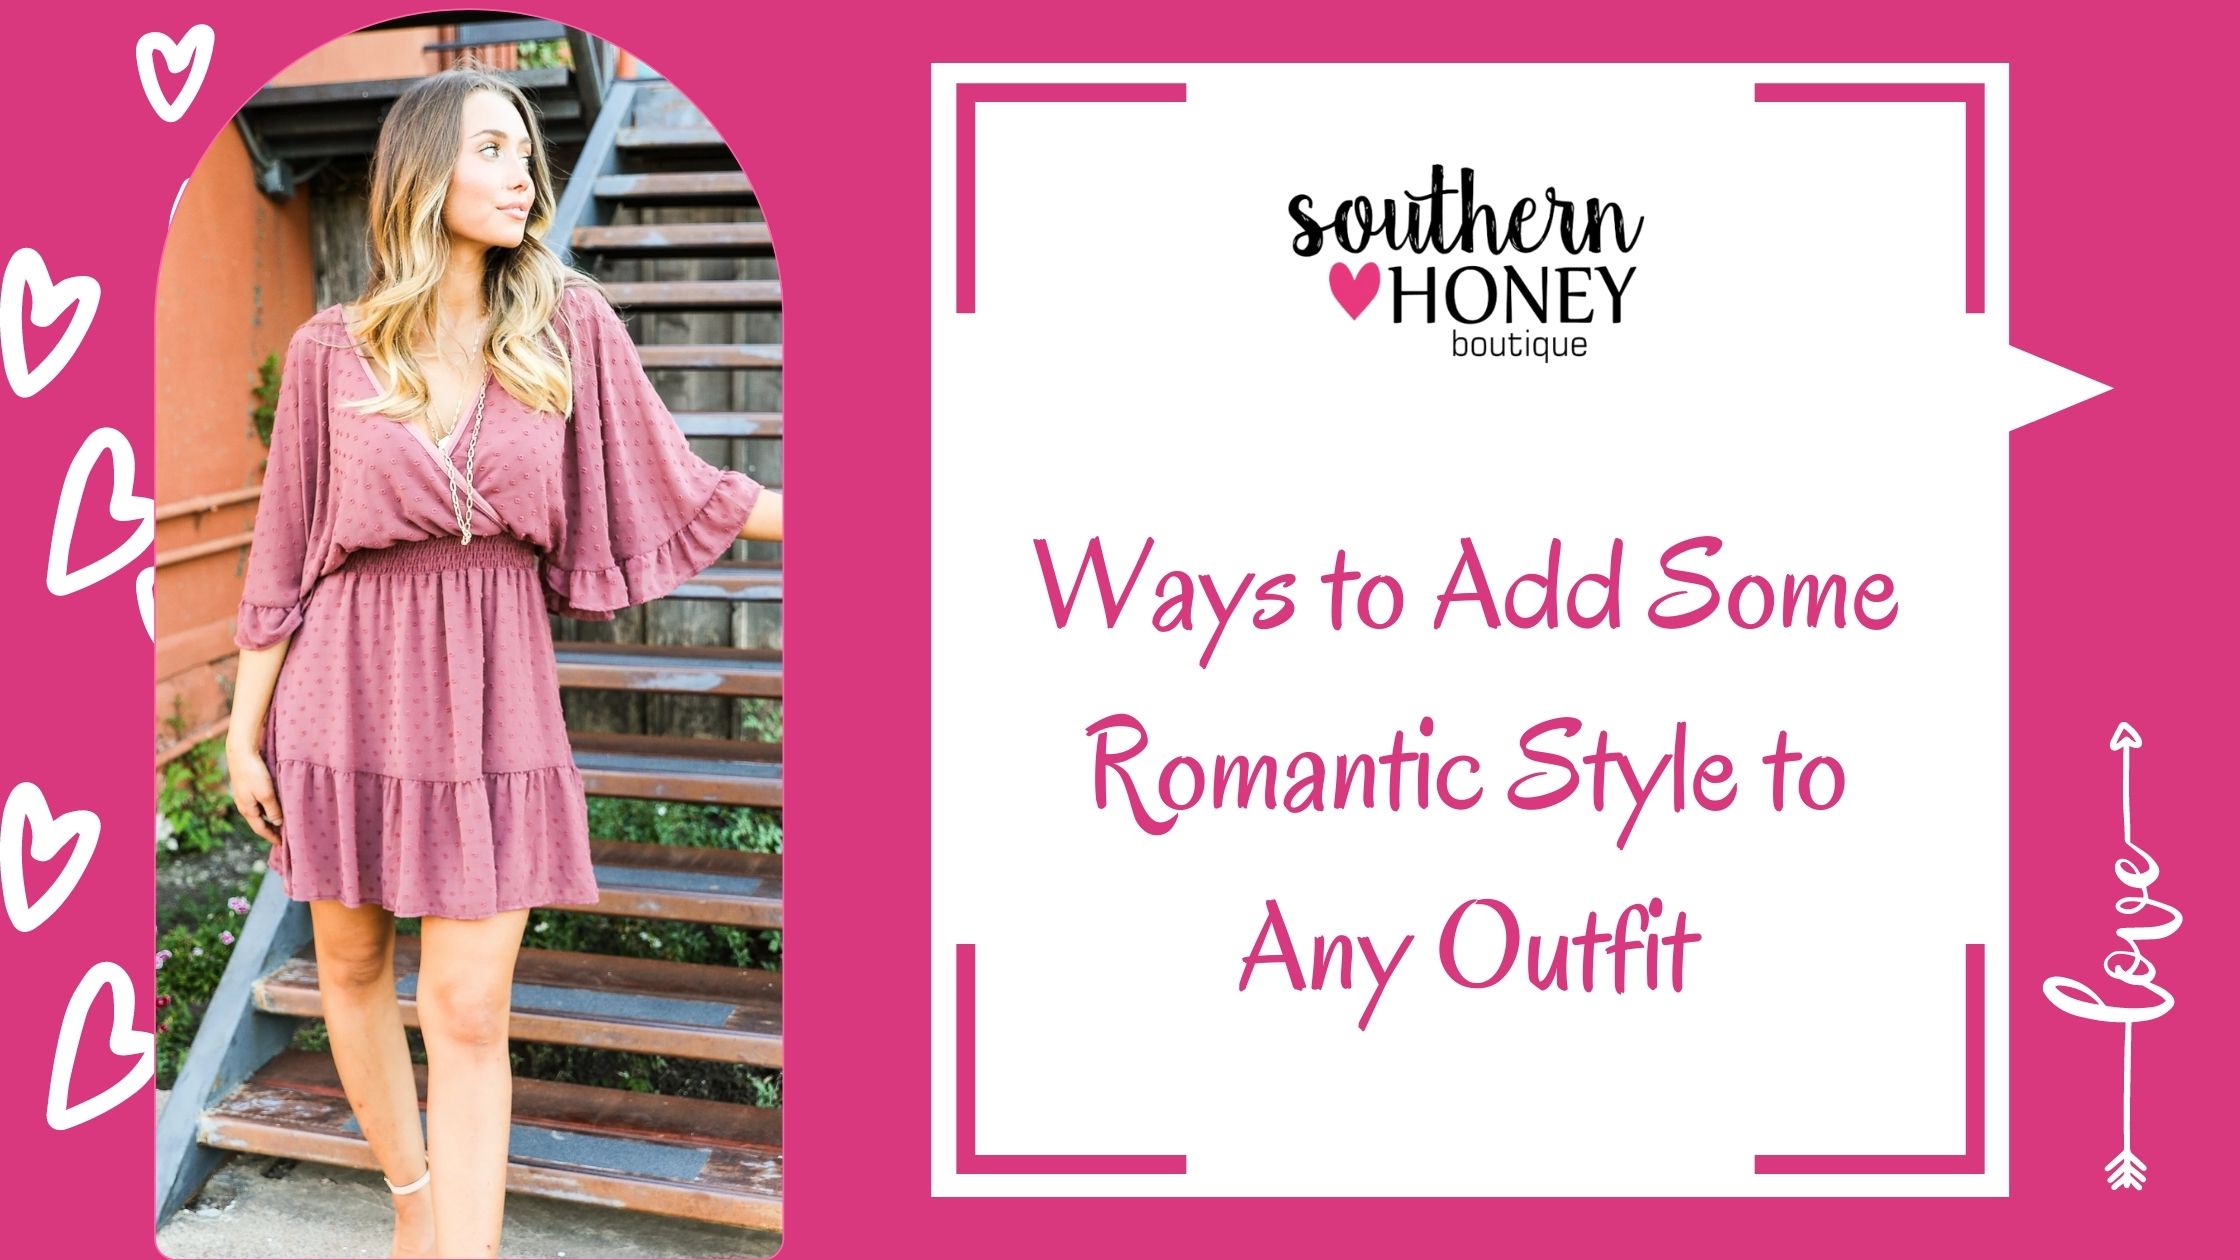 Ways to Add Some Romantic Style to Any Outfit